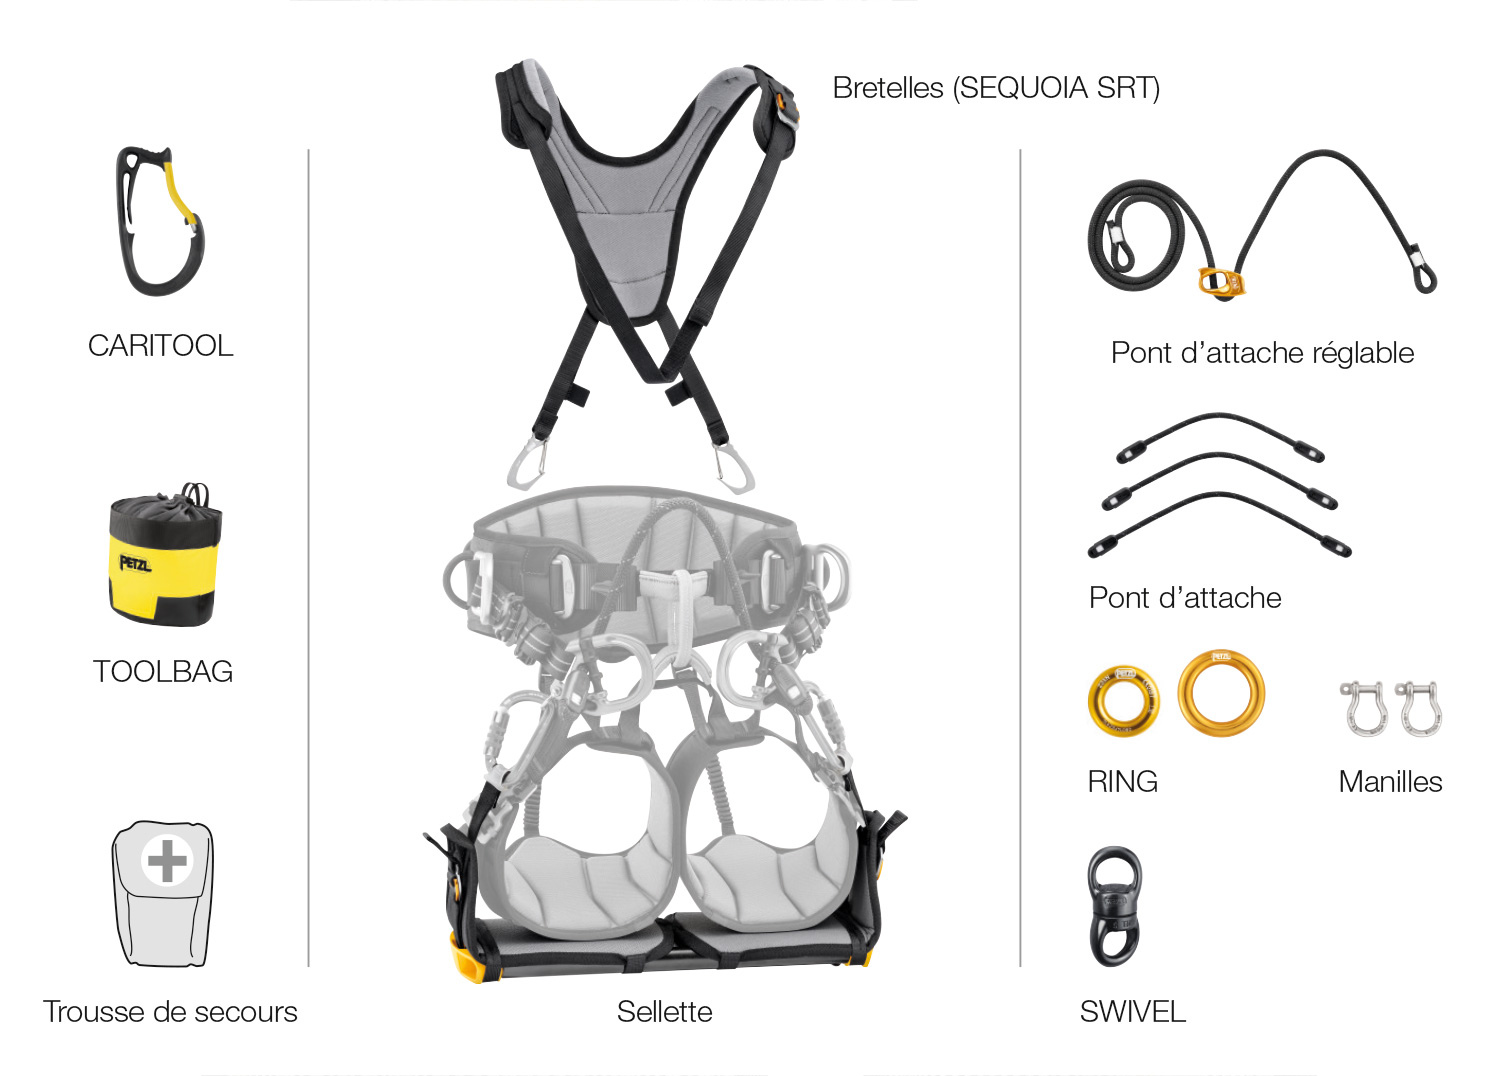 Accessories for the SEQUOIA line of harnesses.